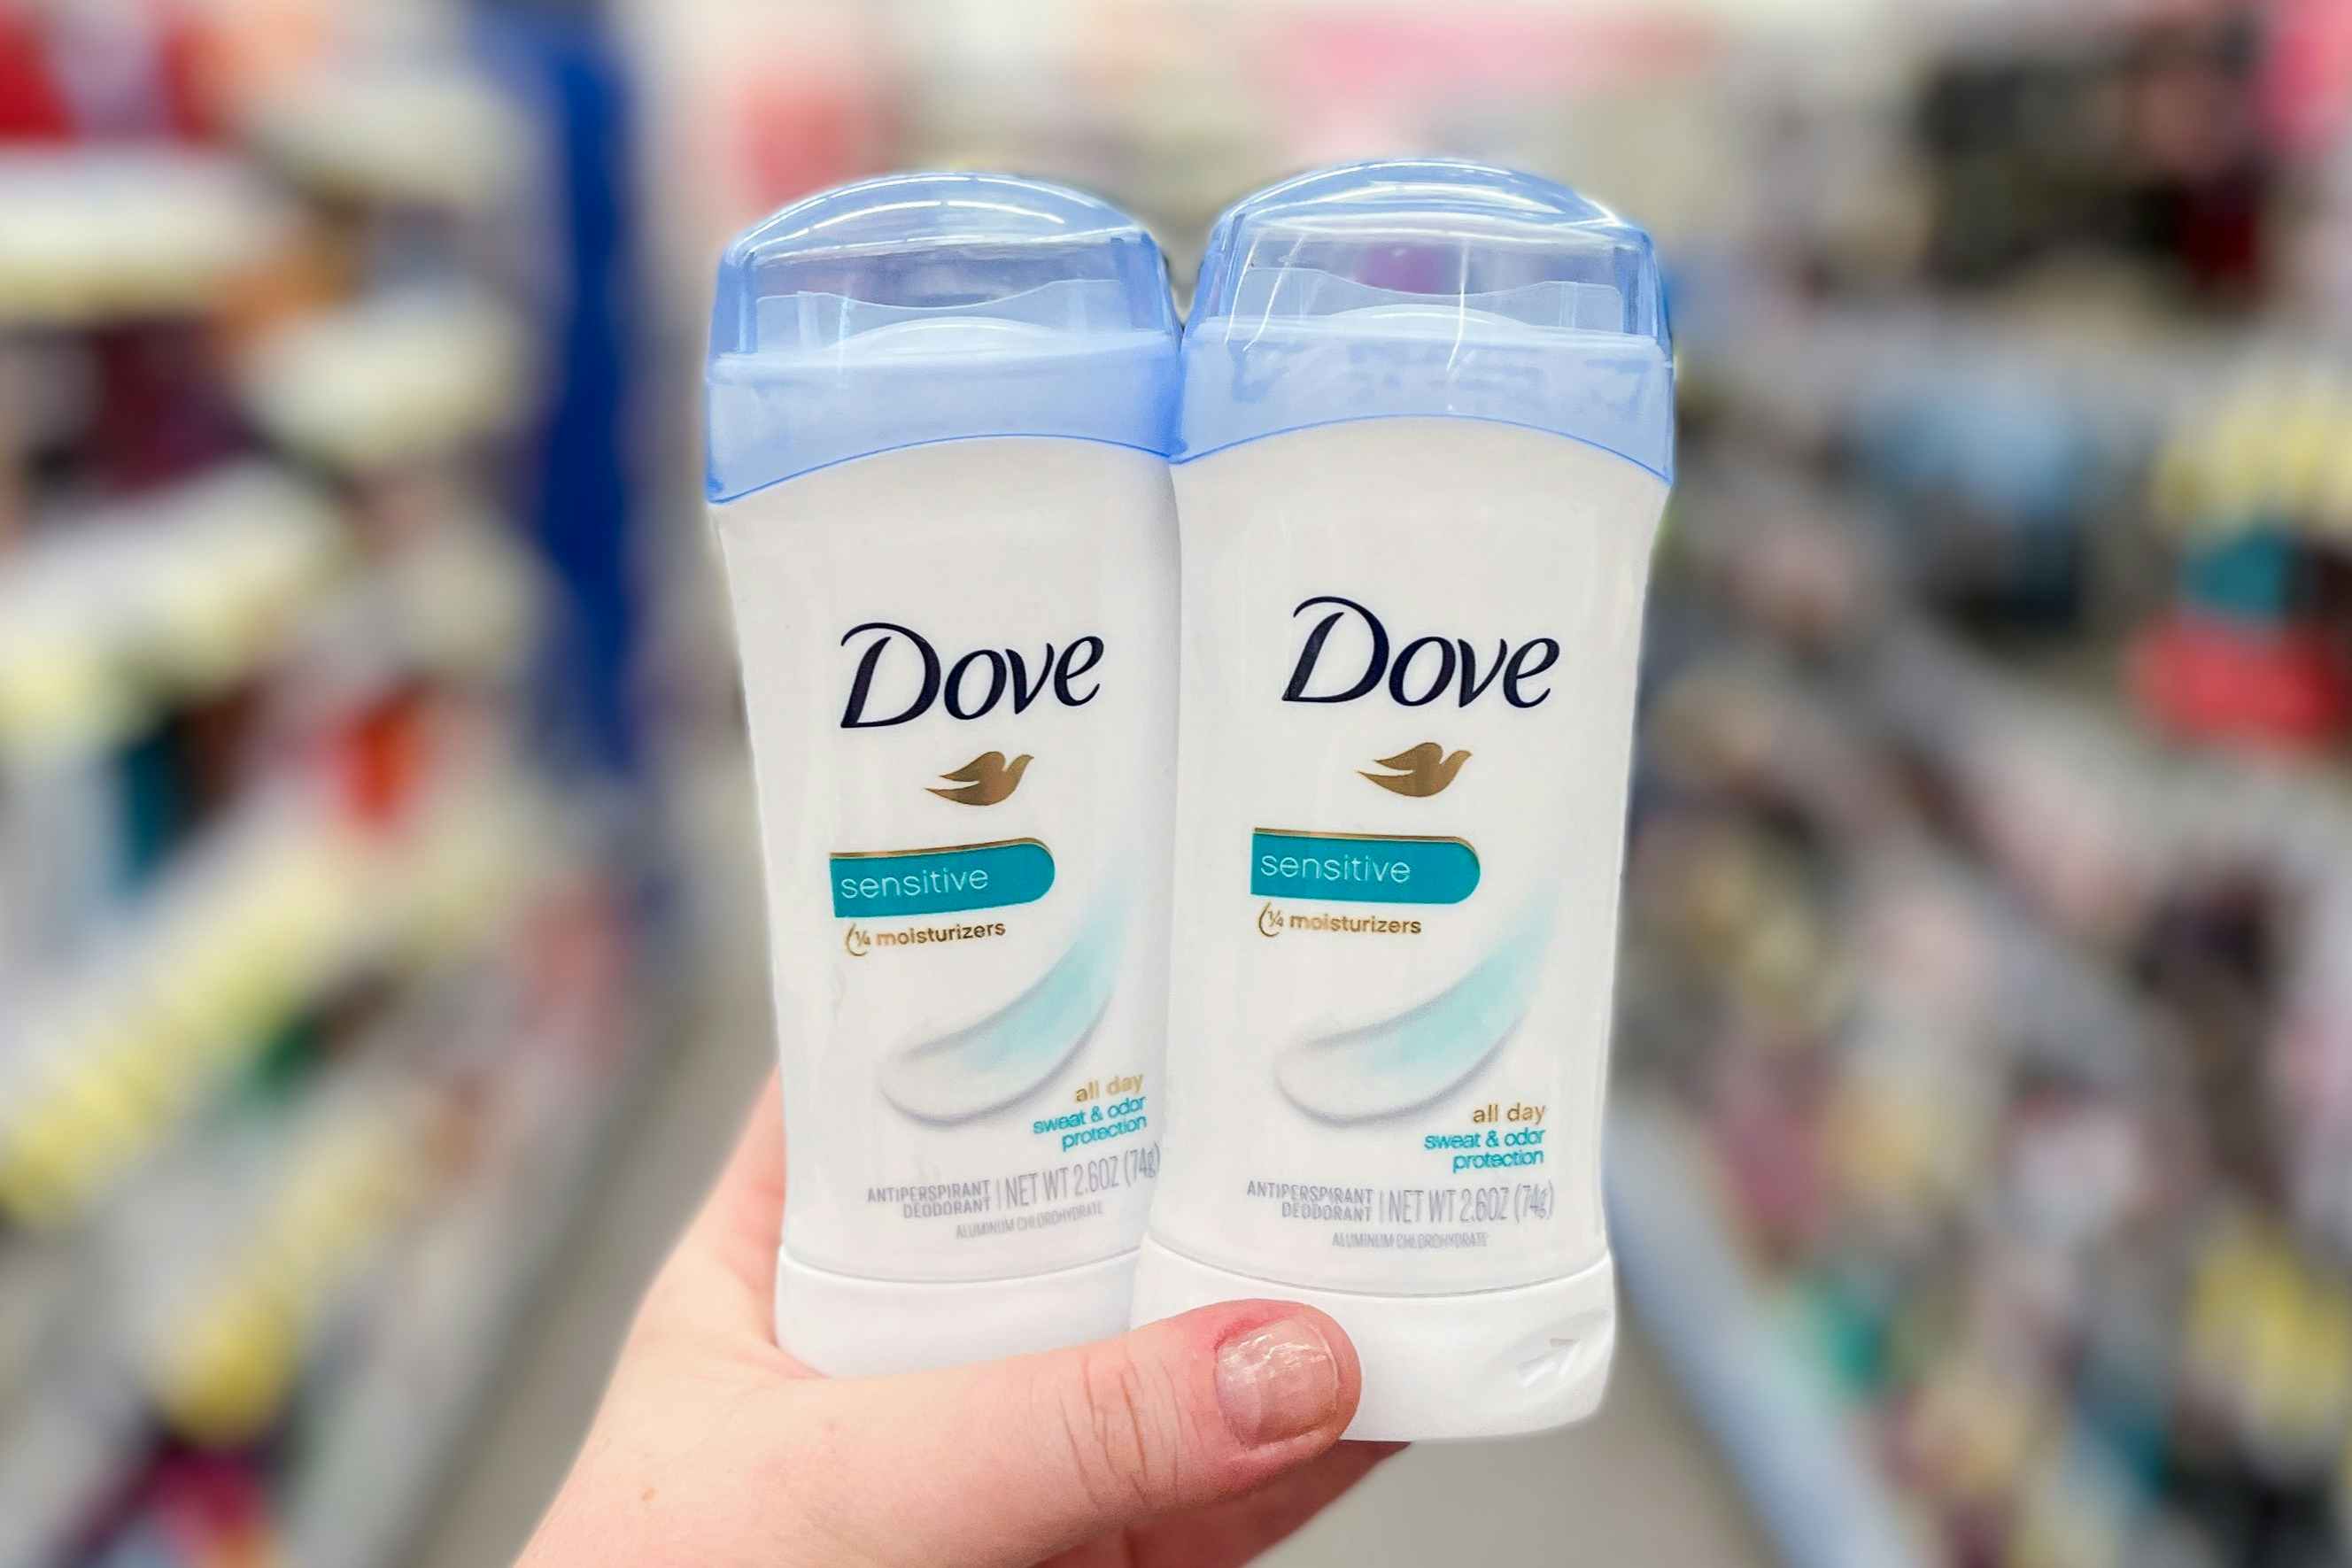 Degree and Dove Deodorants, Under $2 Each at Walgreens